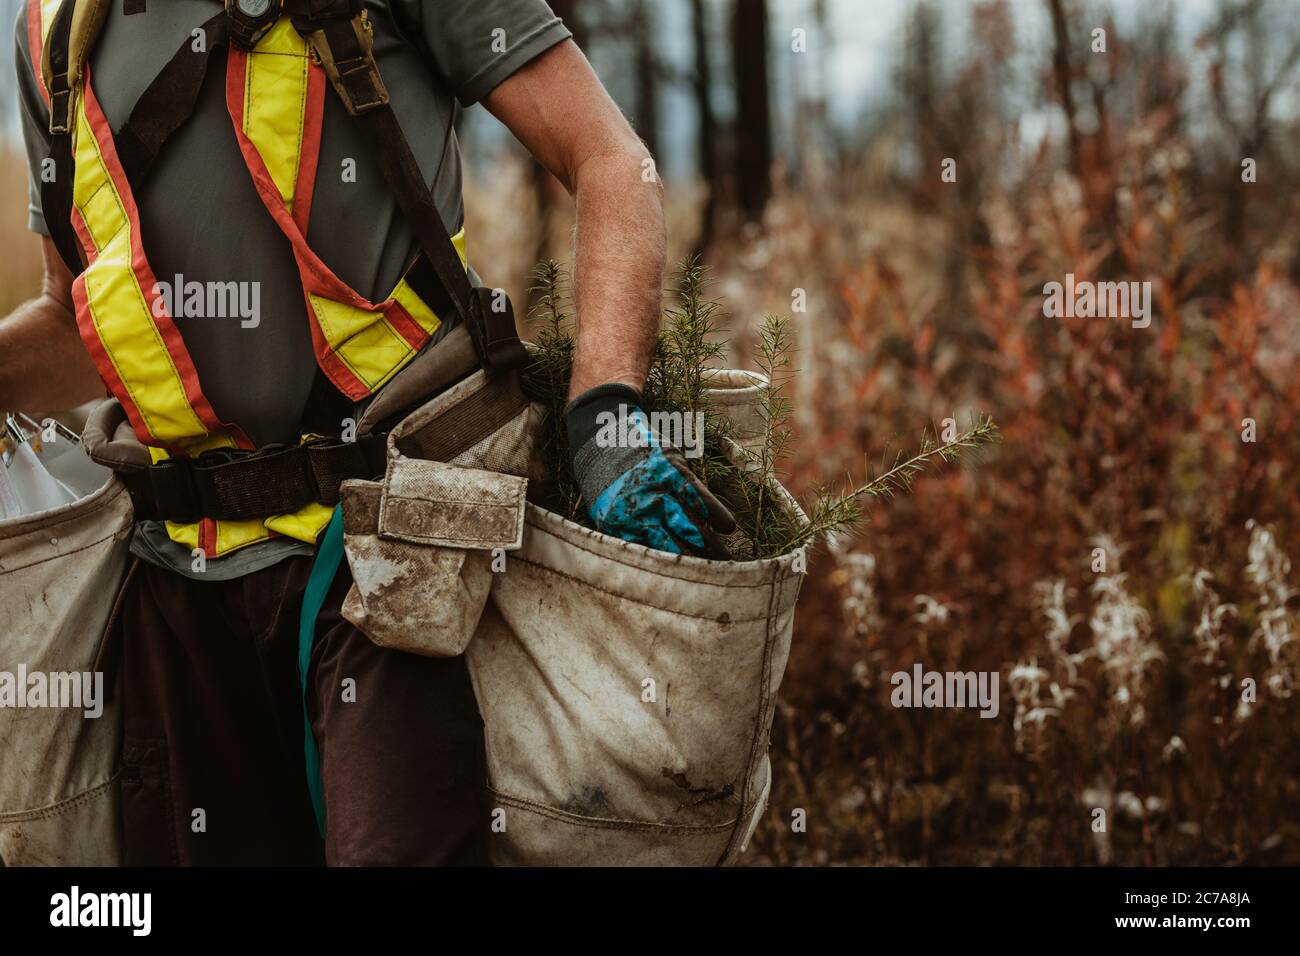 Cropped shot of forester taking out small trees from his bag for planting. Man in reflective vest carrying bags full of saplings in forest. Stock Photo